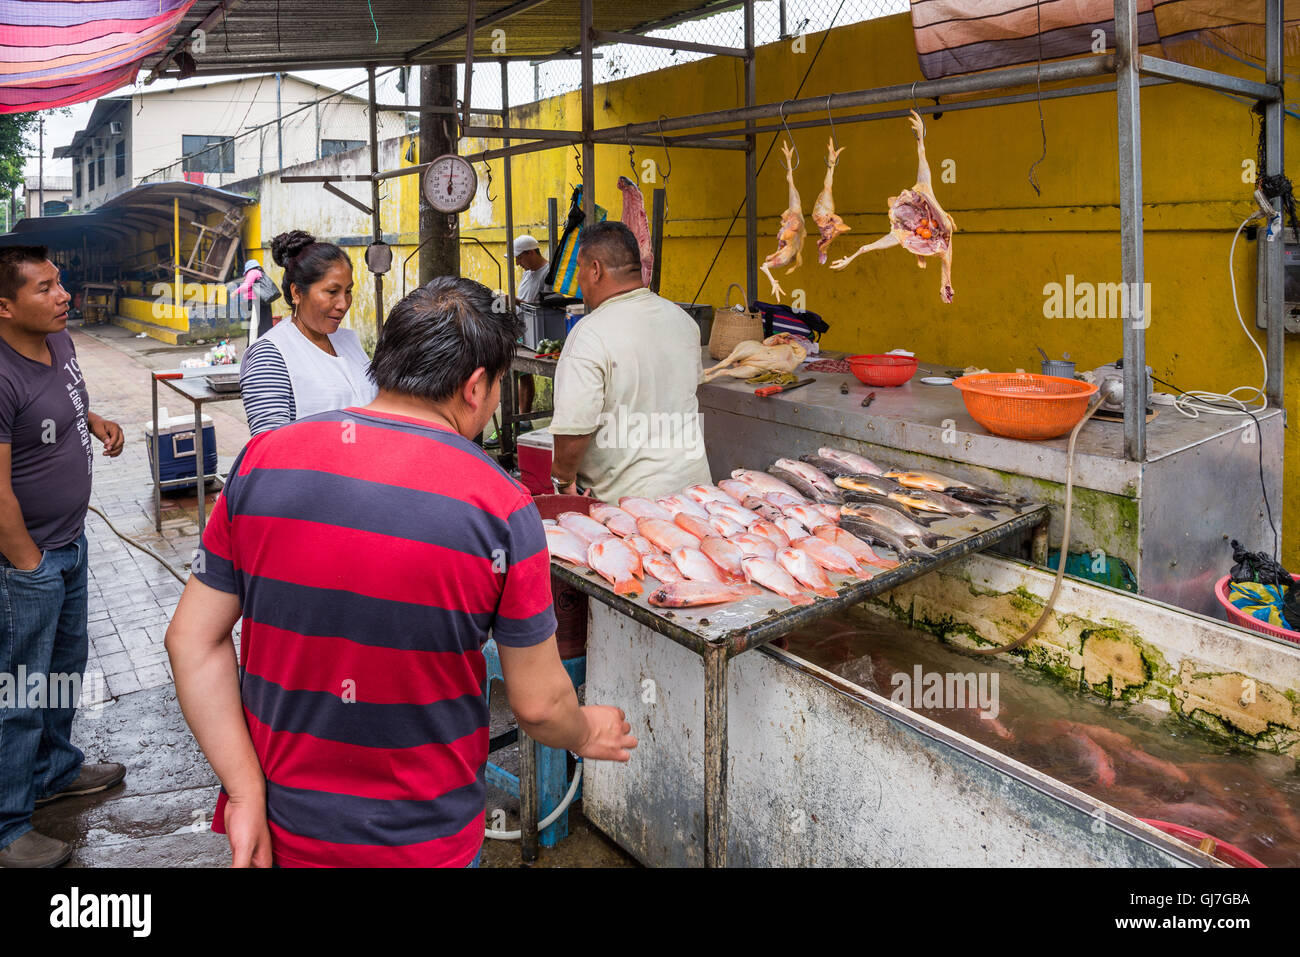 Local people shop for fish and poultry at a market in Coca, the gateway city to the Amazons. Ecuador, South America. Stock Photo